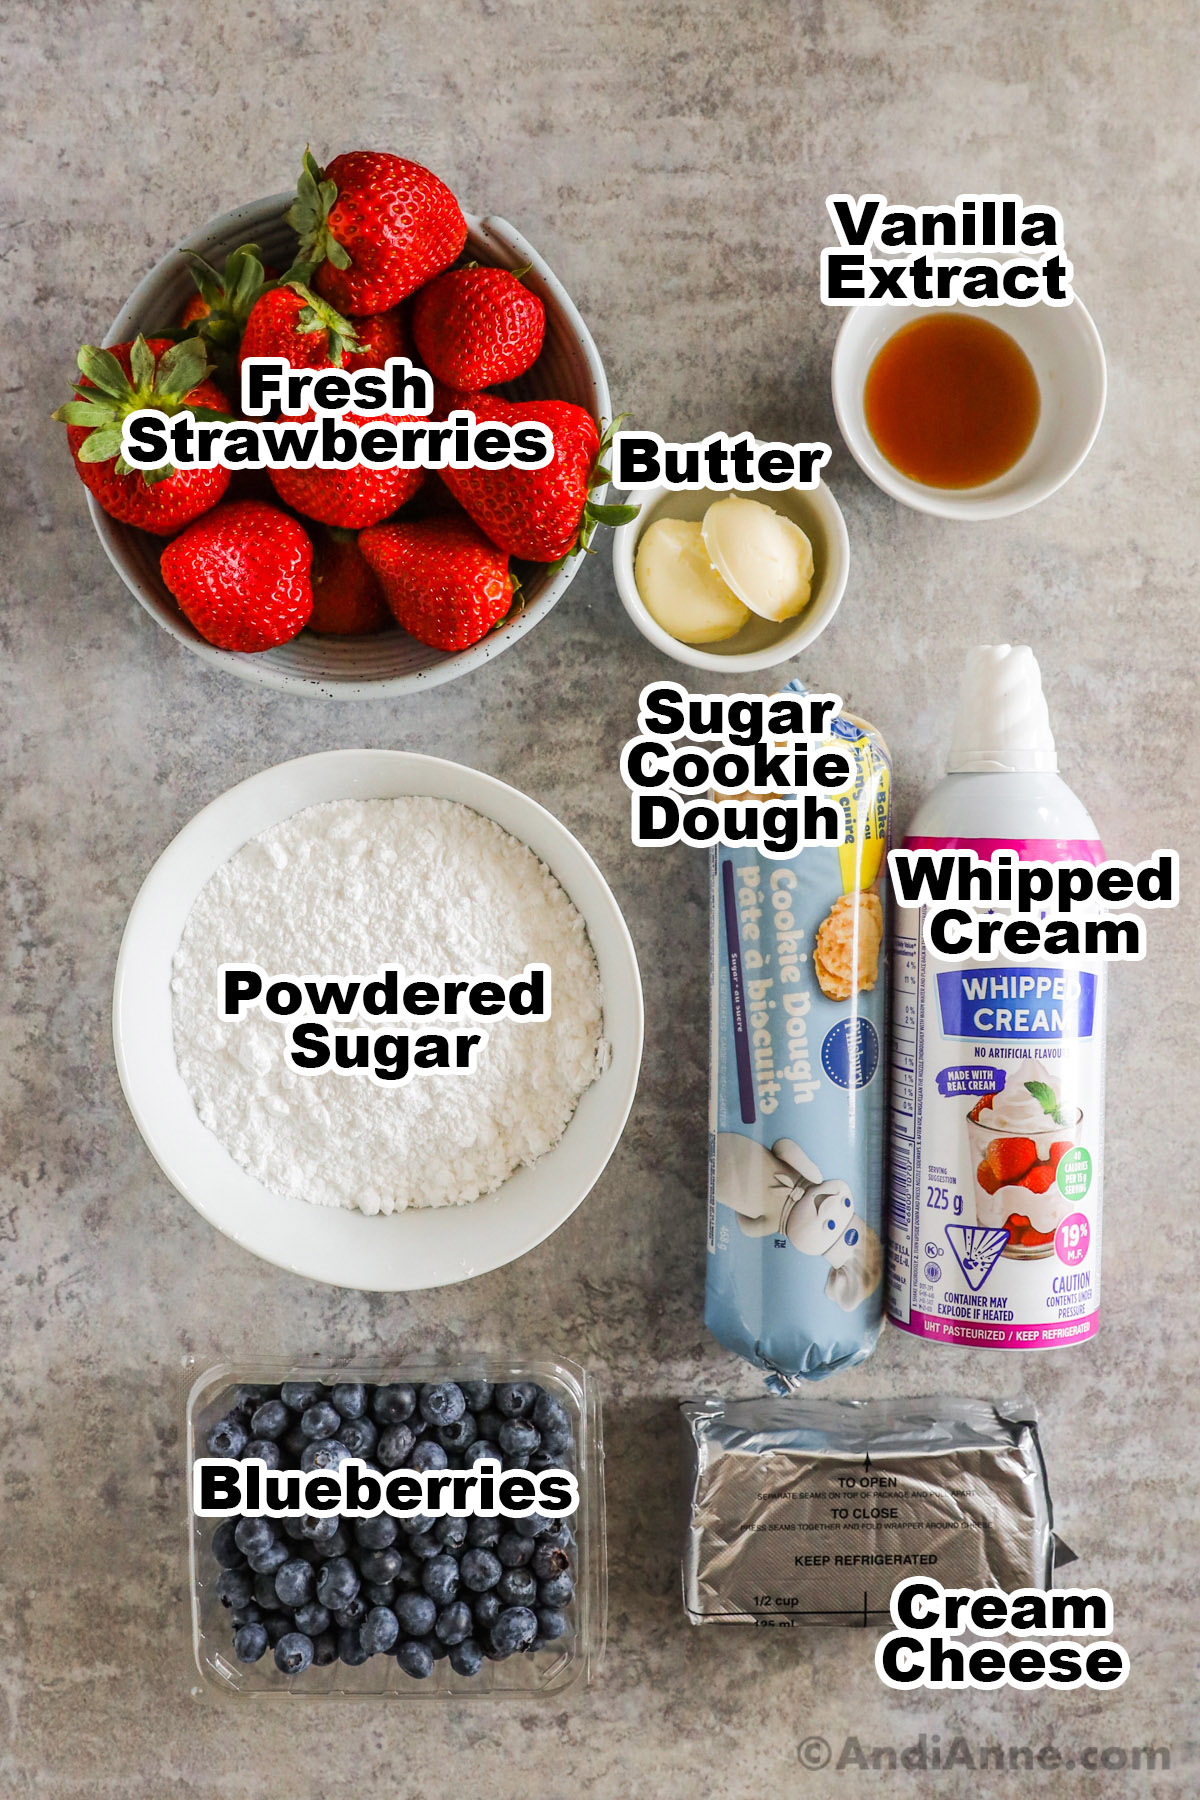 Recipe ingredients including bowl if strawberries, vanilla extract, butter, powdered sugar, sugar cookie dough, whipped cream, blueberries and cream cheese. 